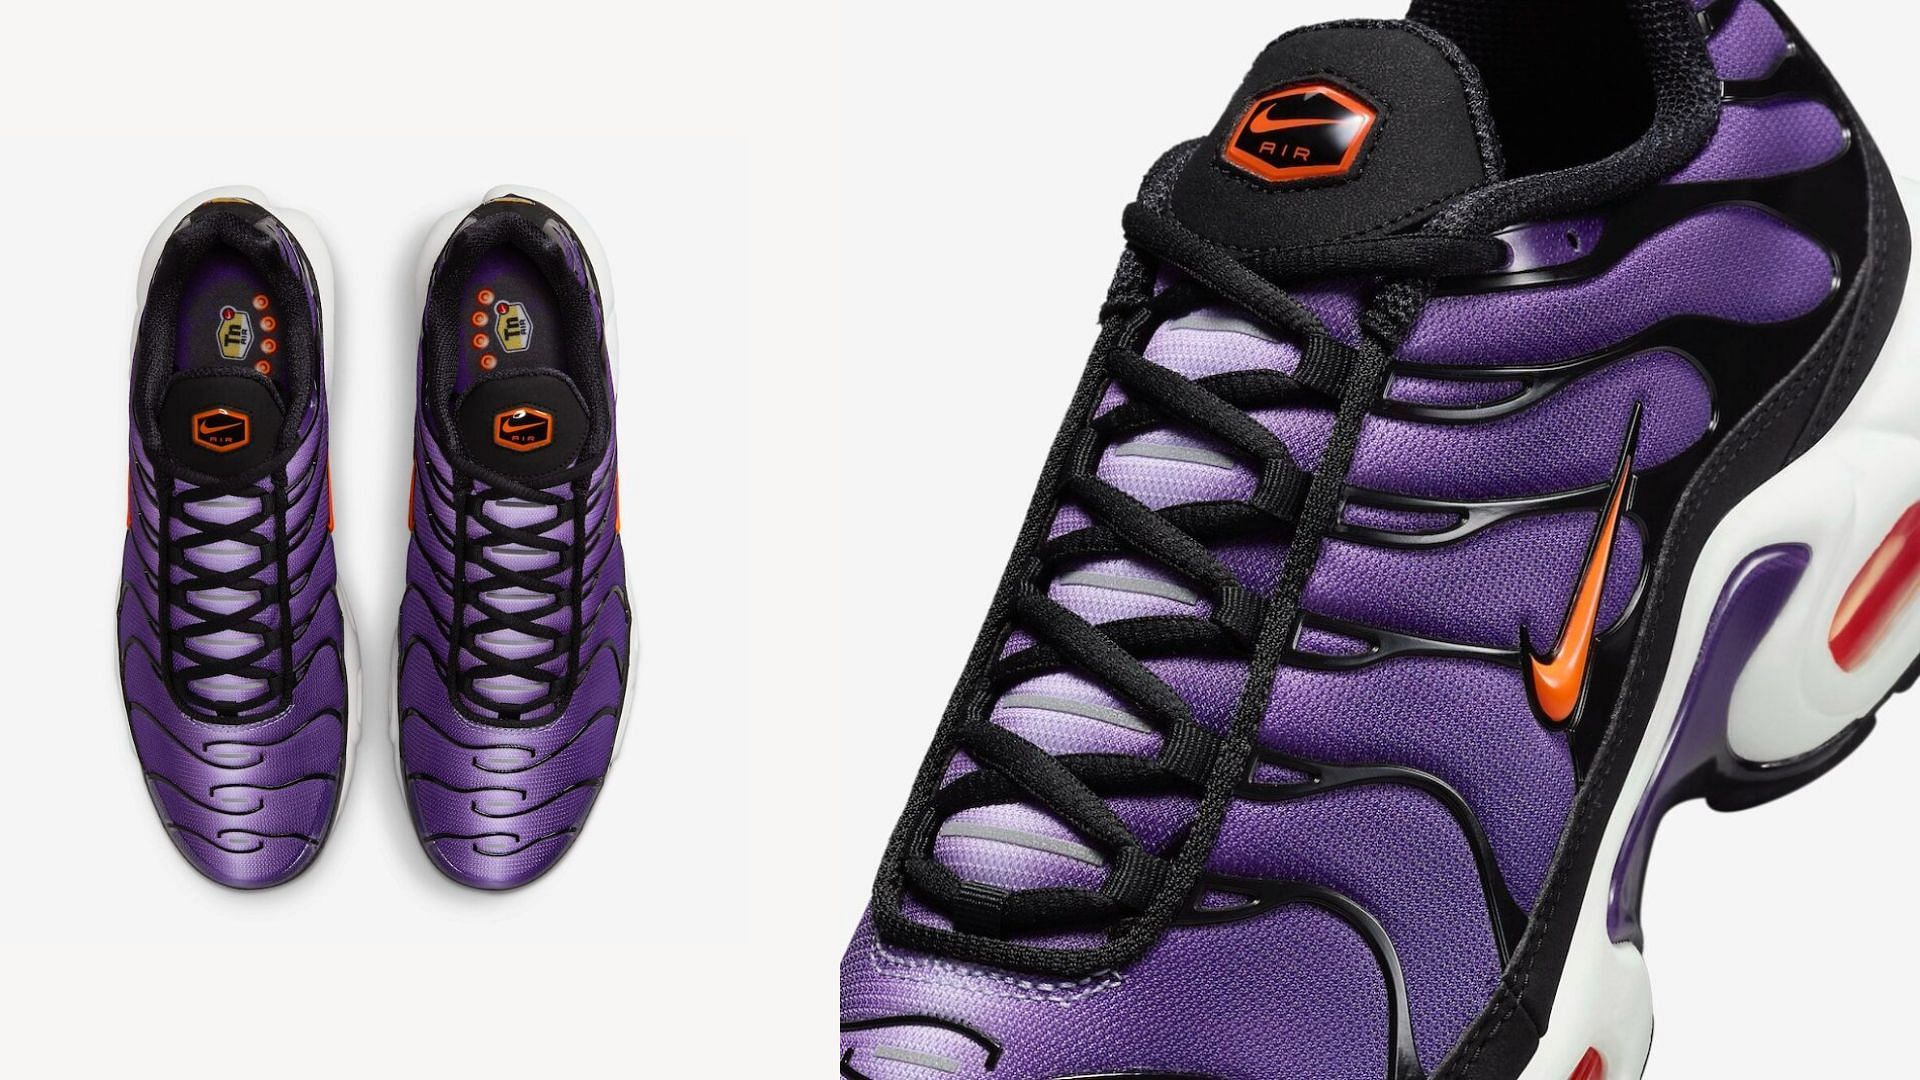 Take a closer look at the uppers of this Nike Air Max Plus shoe (Image via Nike)